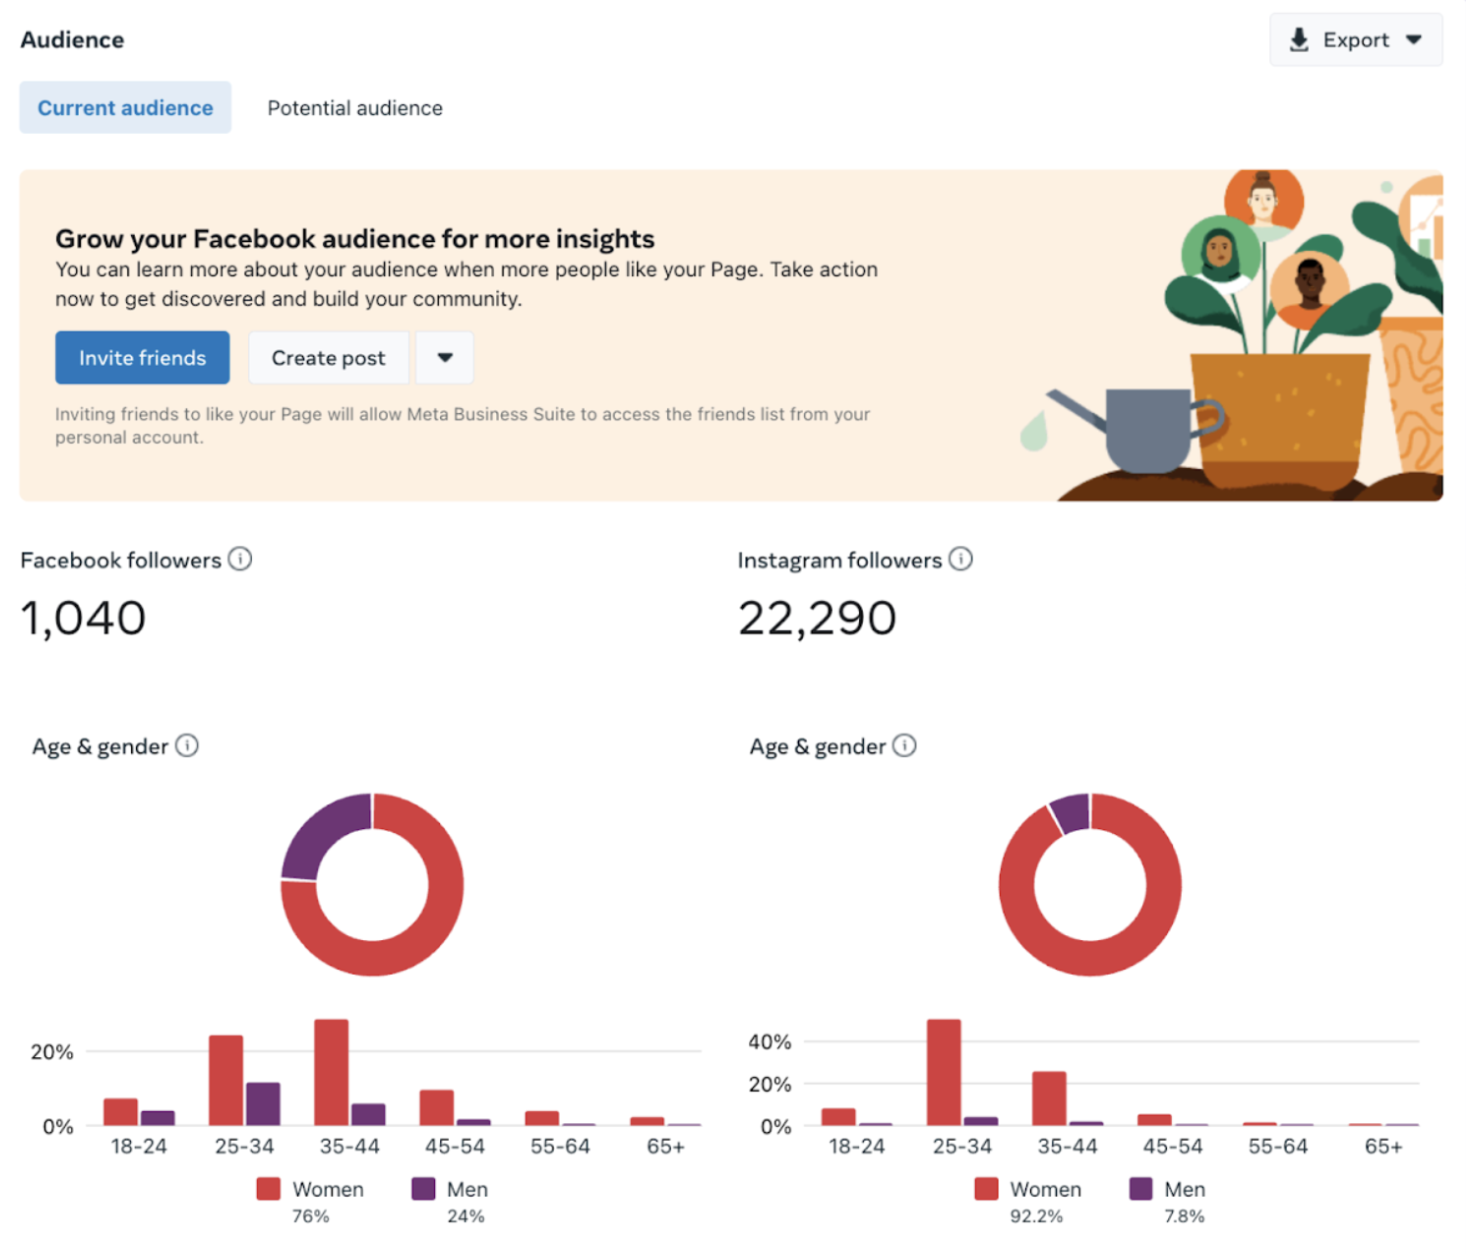 Preview of Audience insights in Creator Studio. The image shows data on the current audience such as Facebook followers and Instagram followers, age, and gender.